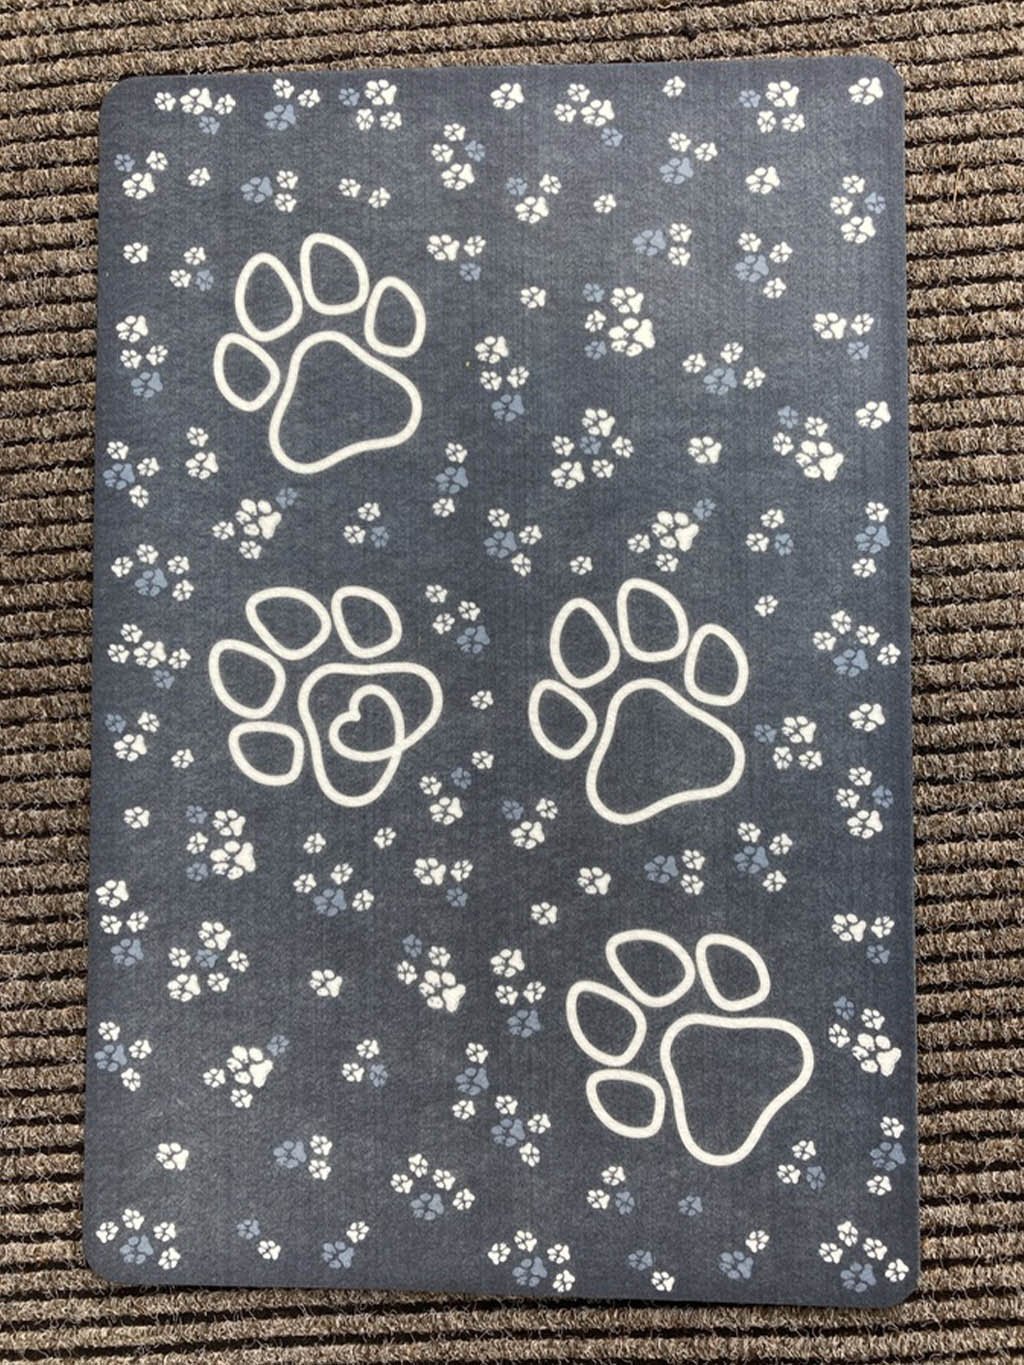 Doormat with white paws